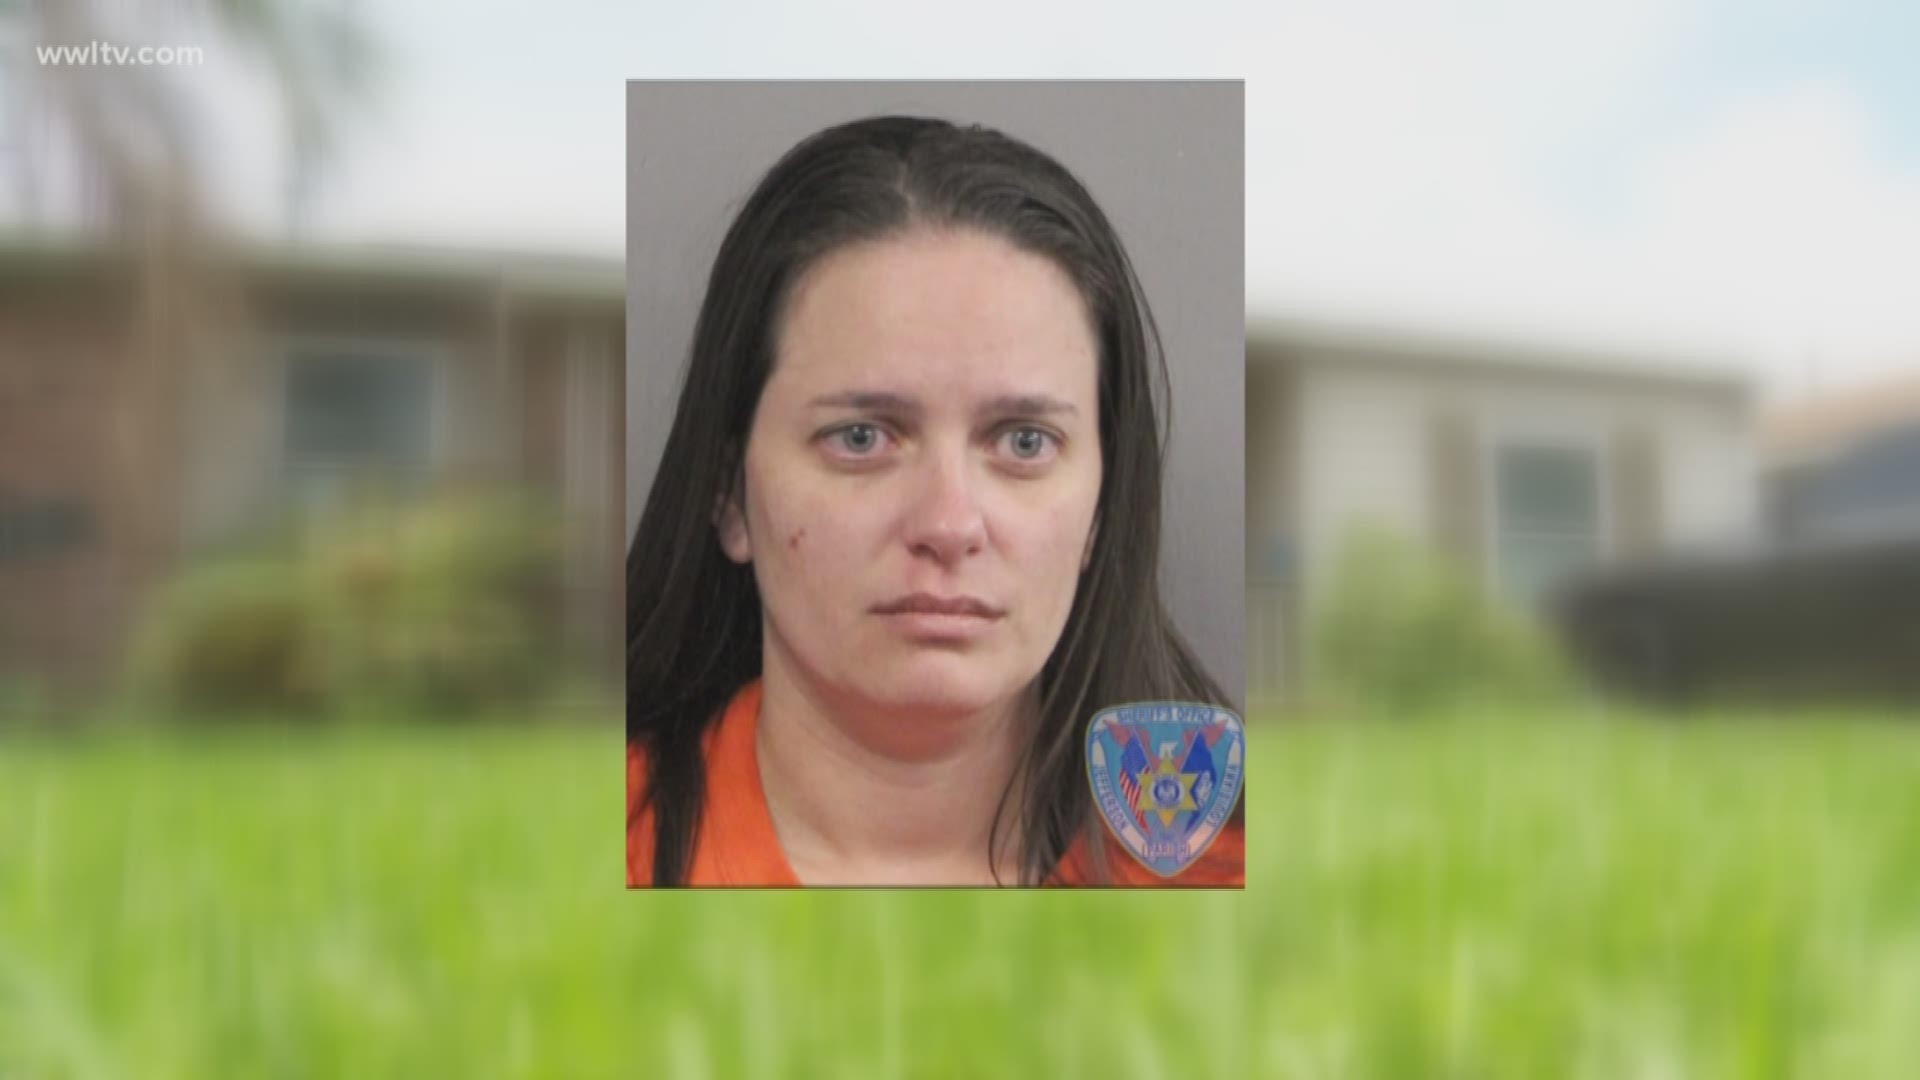 Tuesday a judge ruled that there was enough probable cause to keep Wagner in custody and also ruled to reduce her bond from $500,000 to $300,000